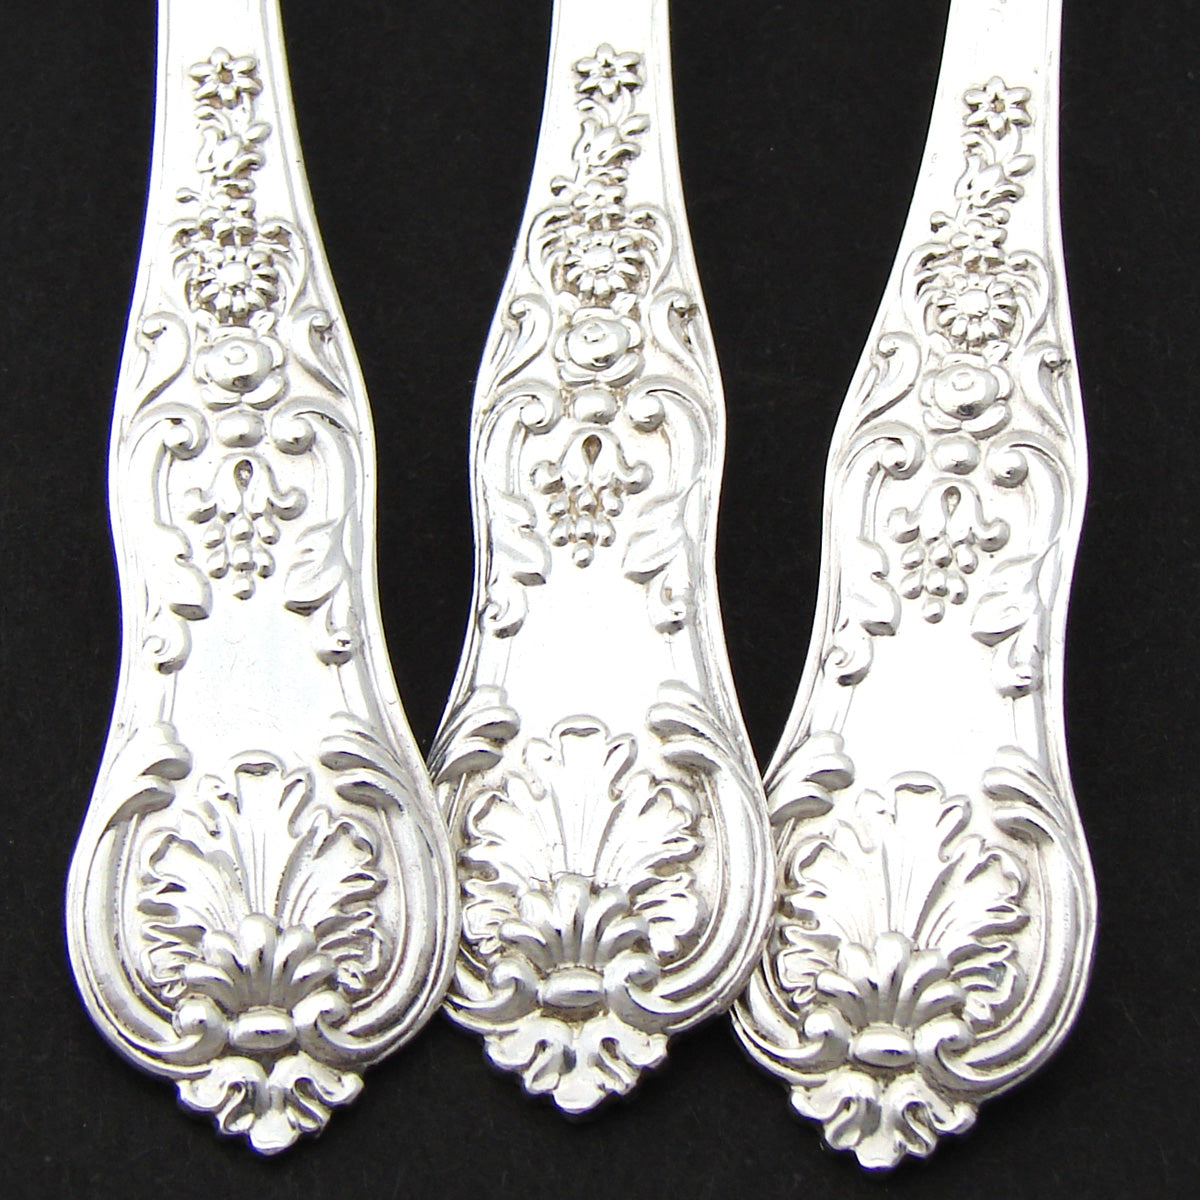 Antique French 1819-1838 Hallmarked Sterling Silver 6pc Teaspoon Set, Embossed Leather Case or Etui